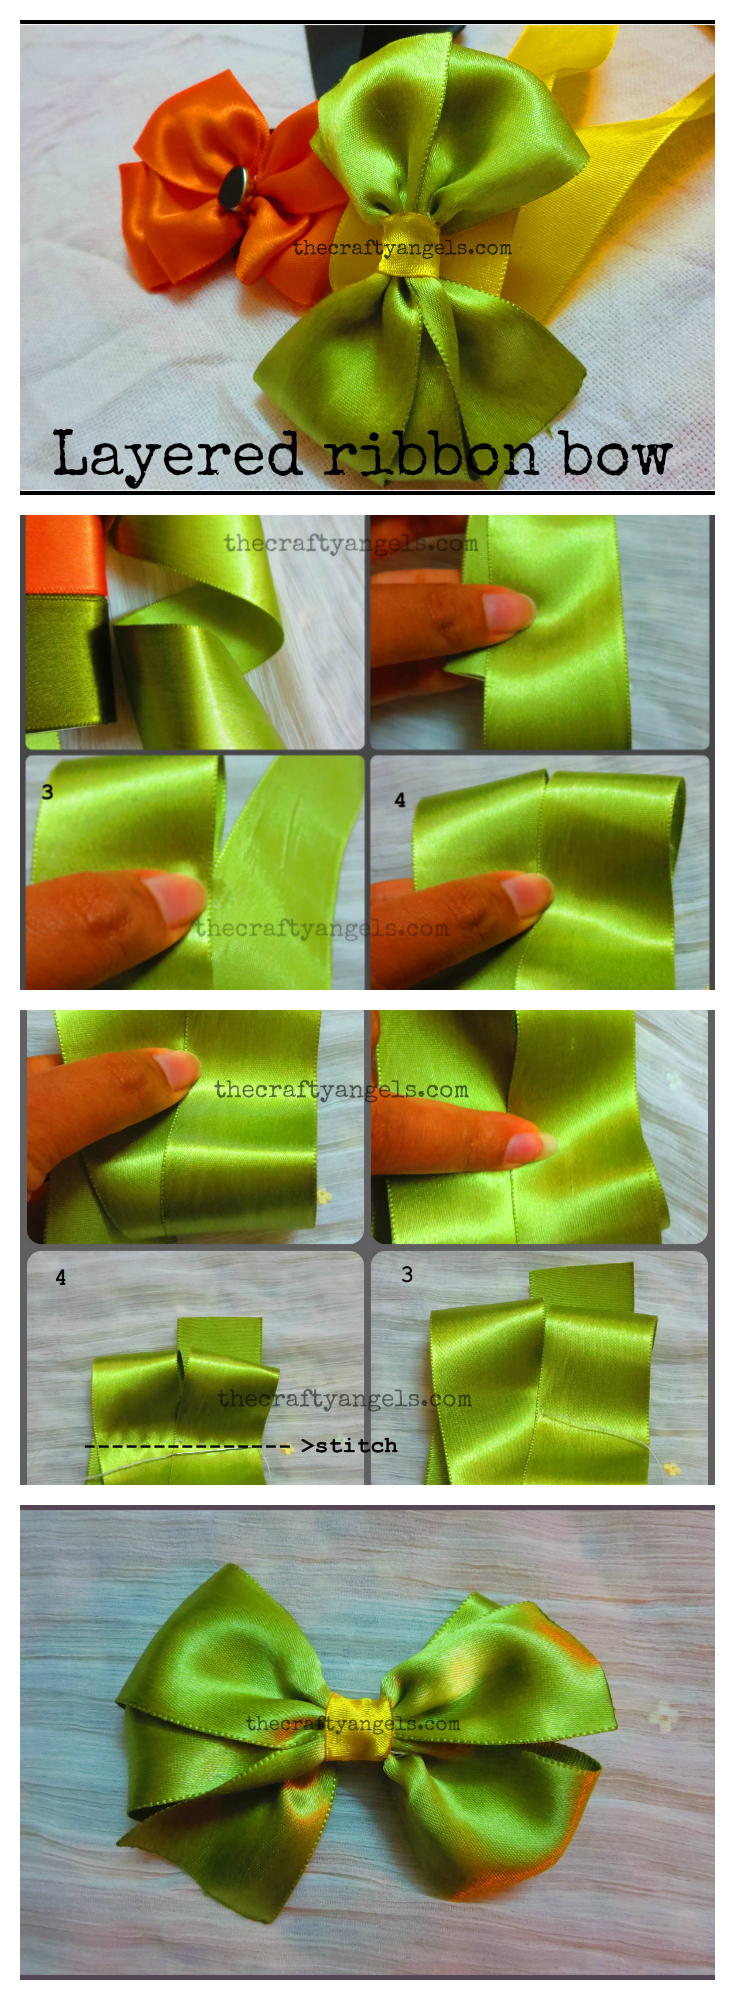 ribbon-bow-tutorial-collage